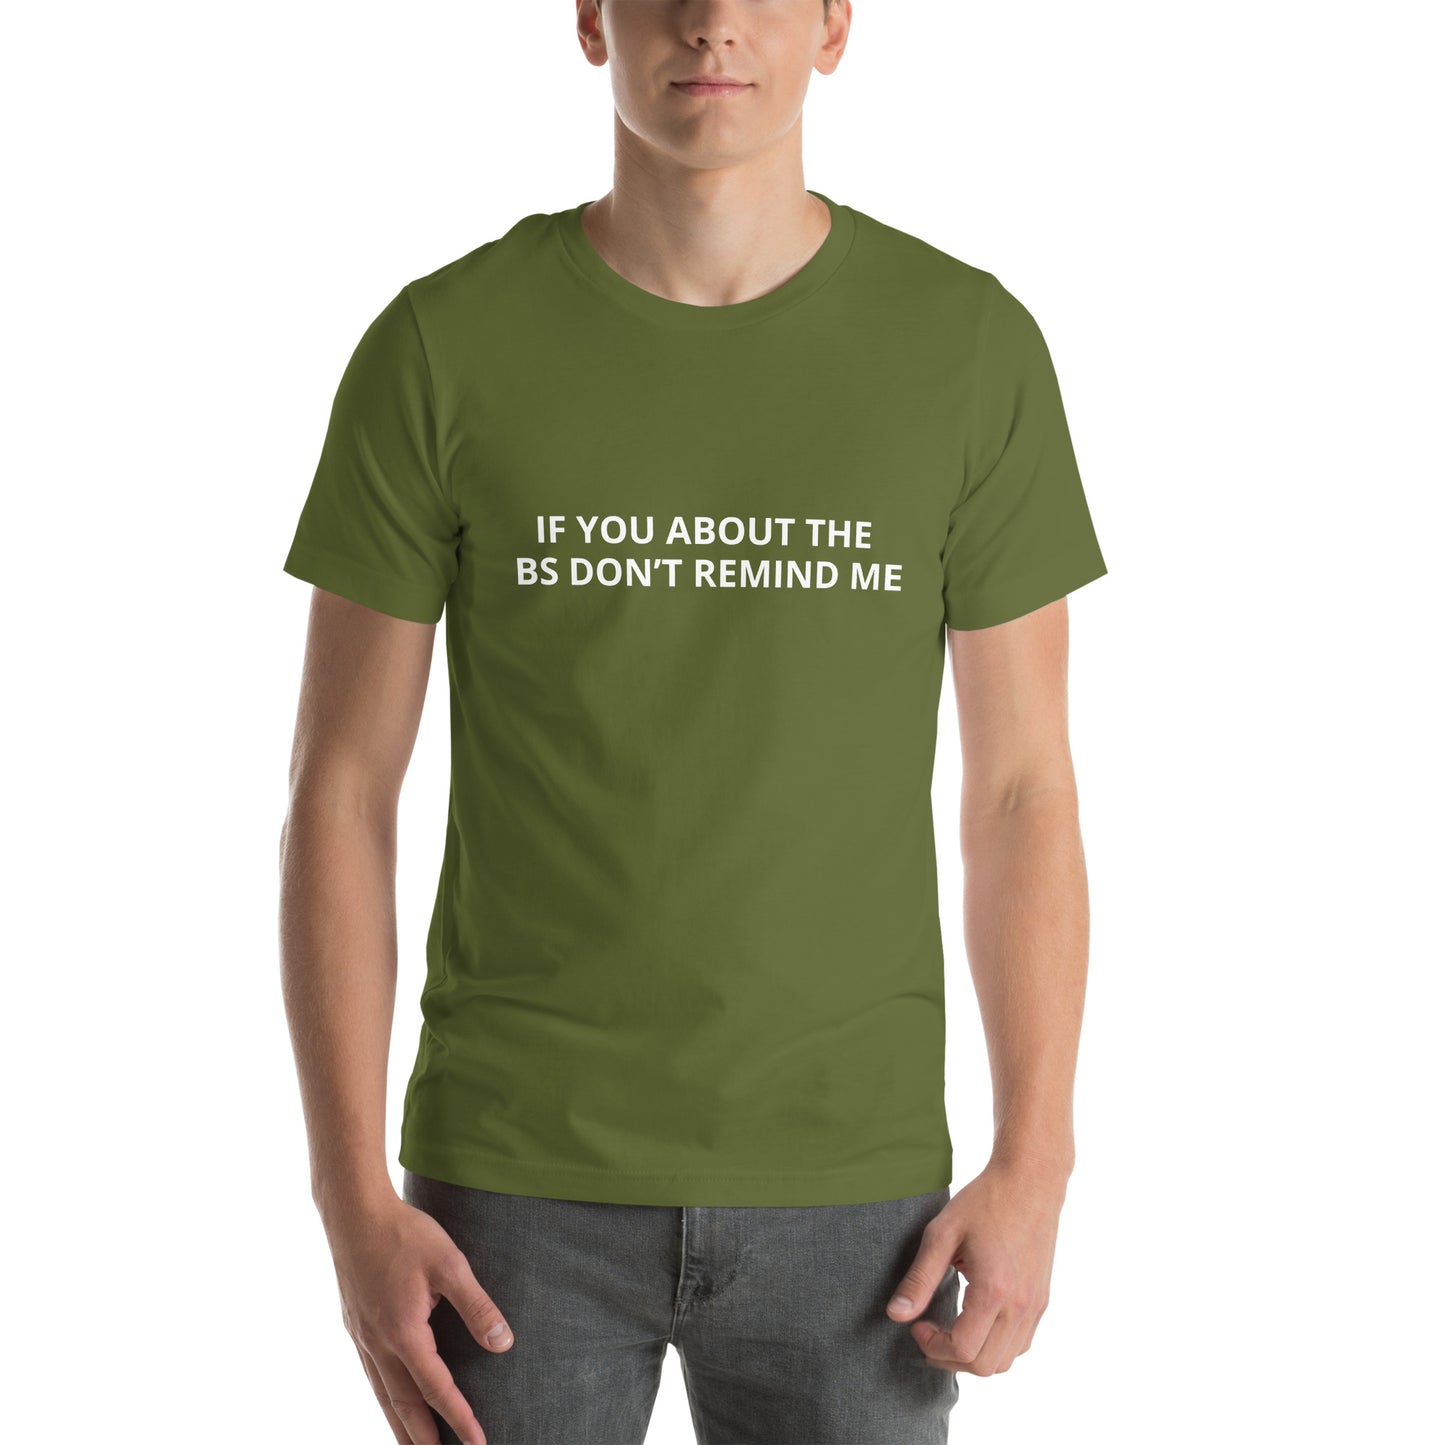 IF YOU ABOUT THE BS DON’T REMIND ME  Unisex t-shirt